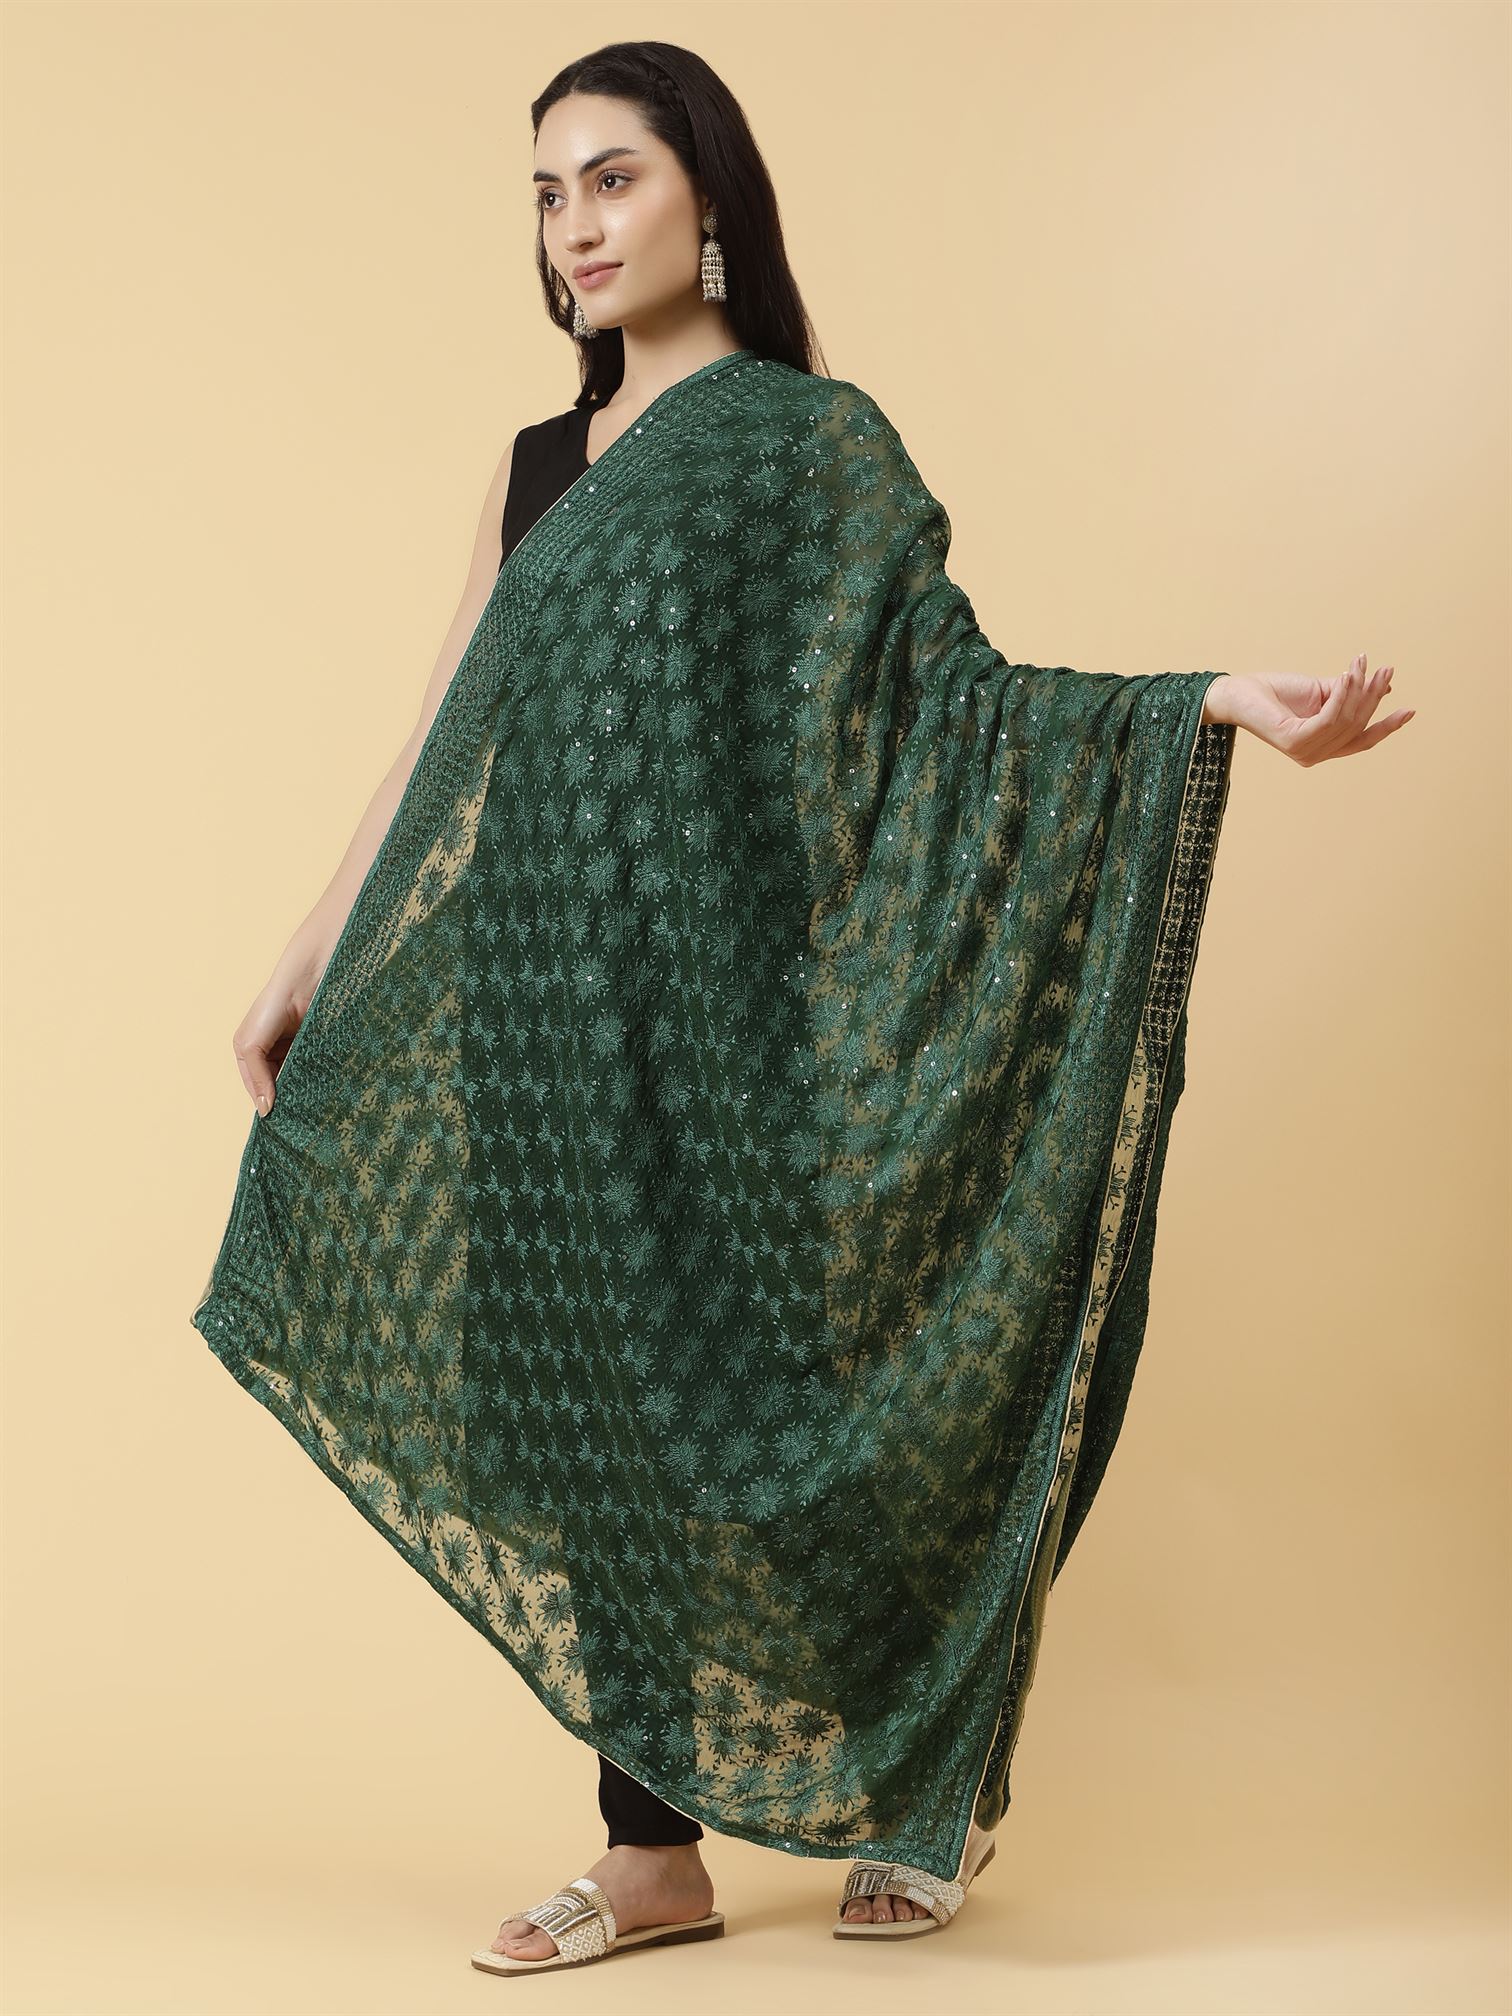 bottle-green-sequinned-embroidery-dupatta-mcrcpd0234-moda-chales-2